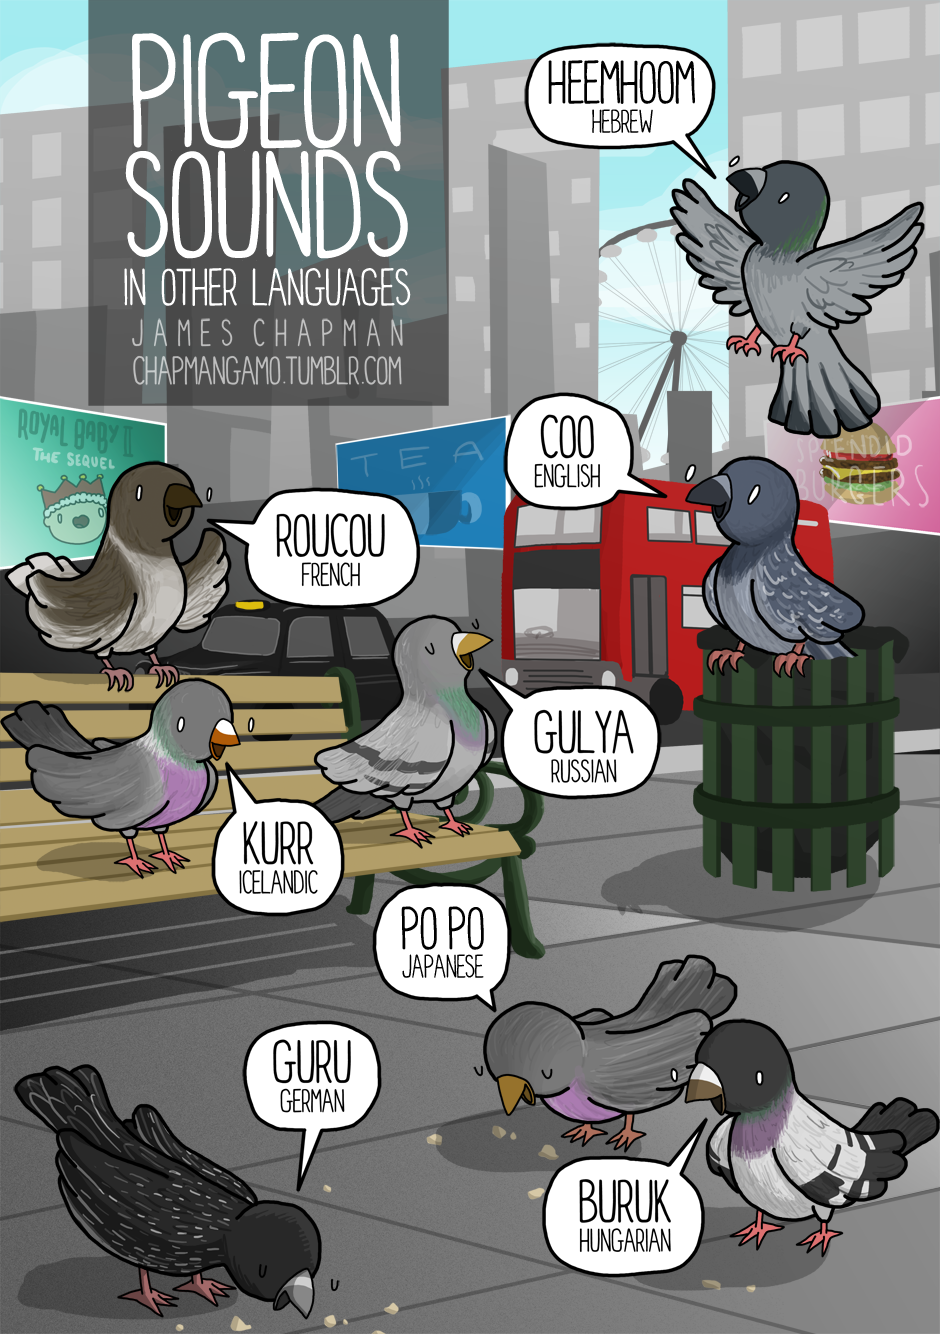 JAMES CHAPMAN DRAWS — How to sound like a pigeon in 8 languages ...